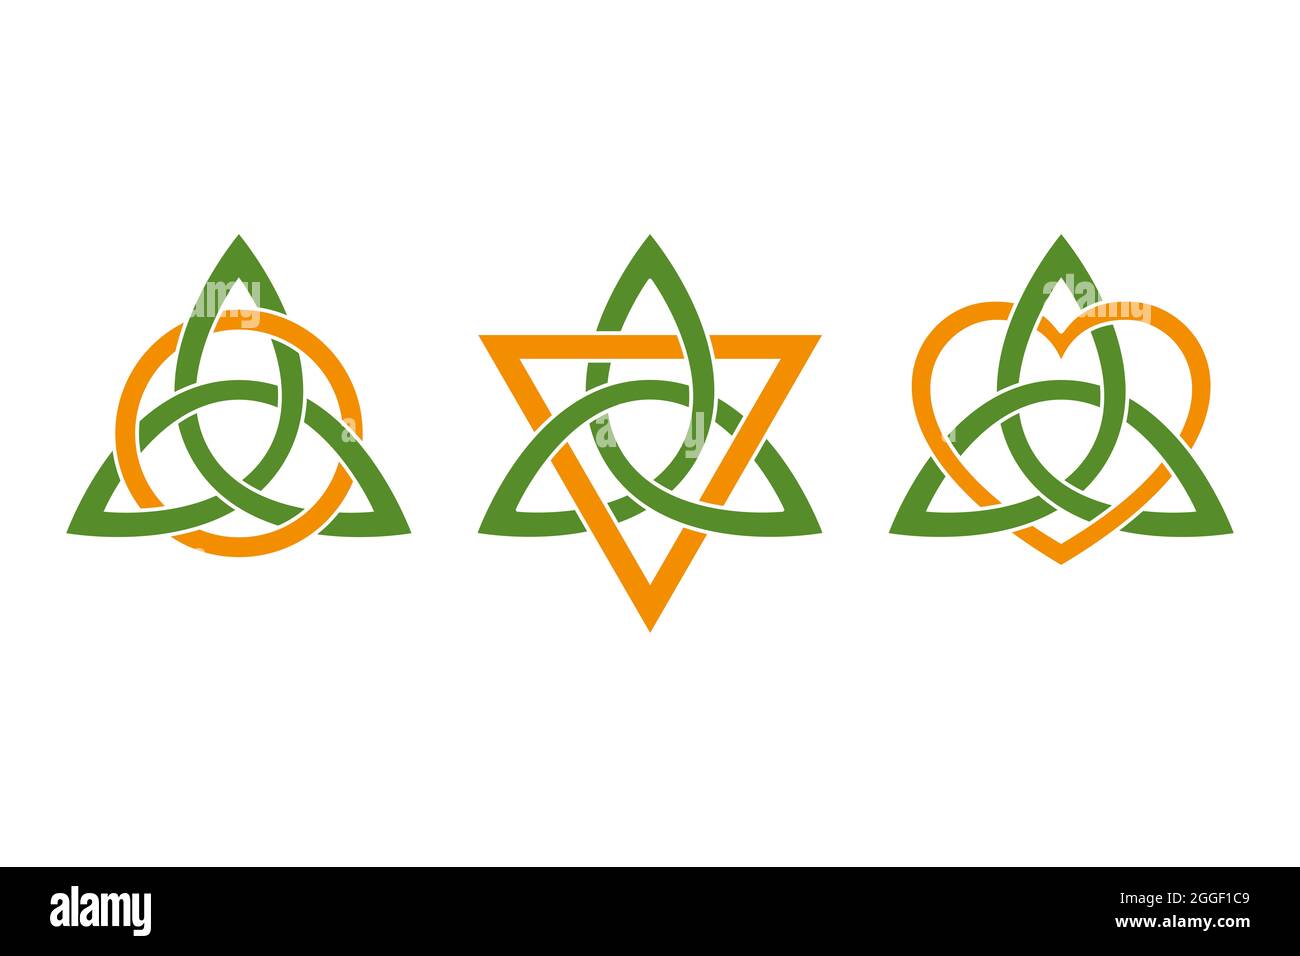 Colored triquetras, intertwined with three orange colored symbols. Green Celtic knots, triangle shaped figures, used in ancient Christian ornaments. Stock Photo